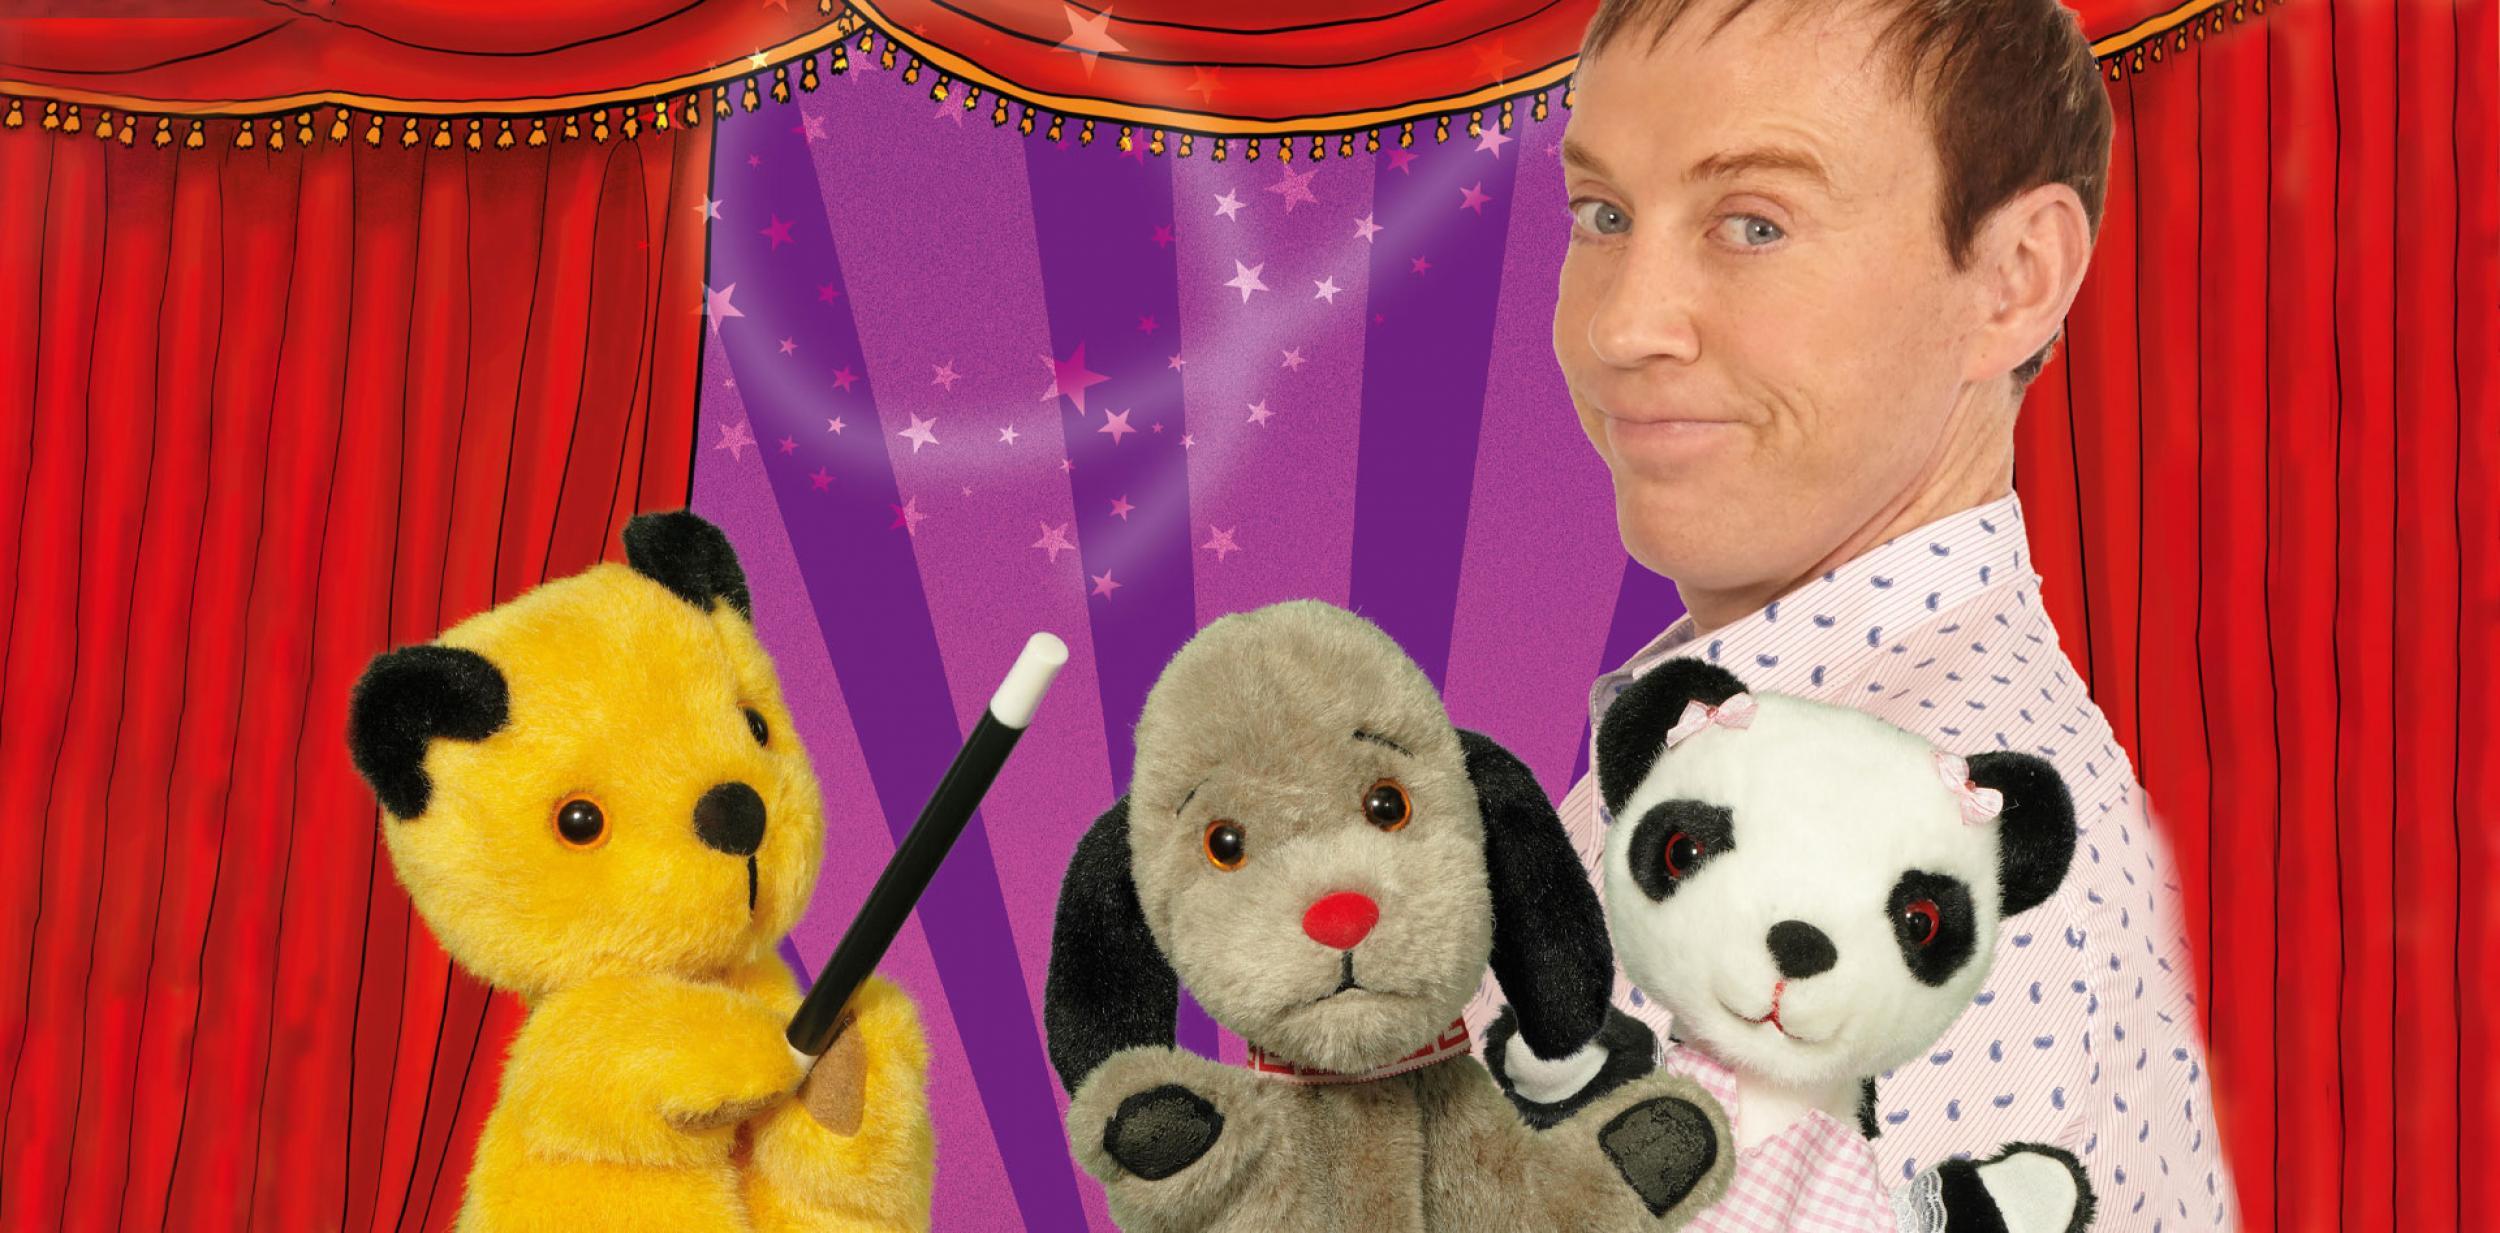 Sooty, Sweep and Soo puppets